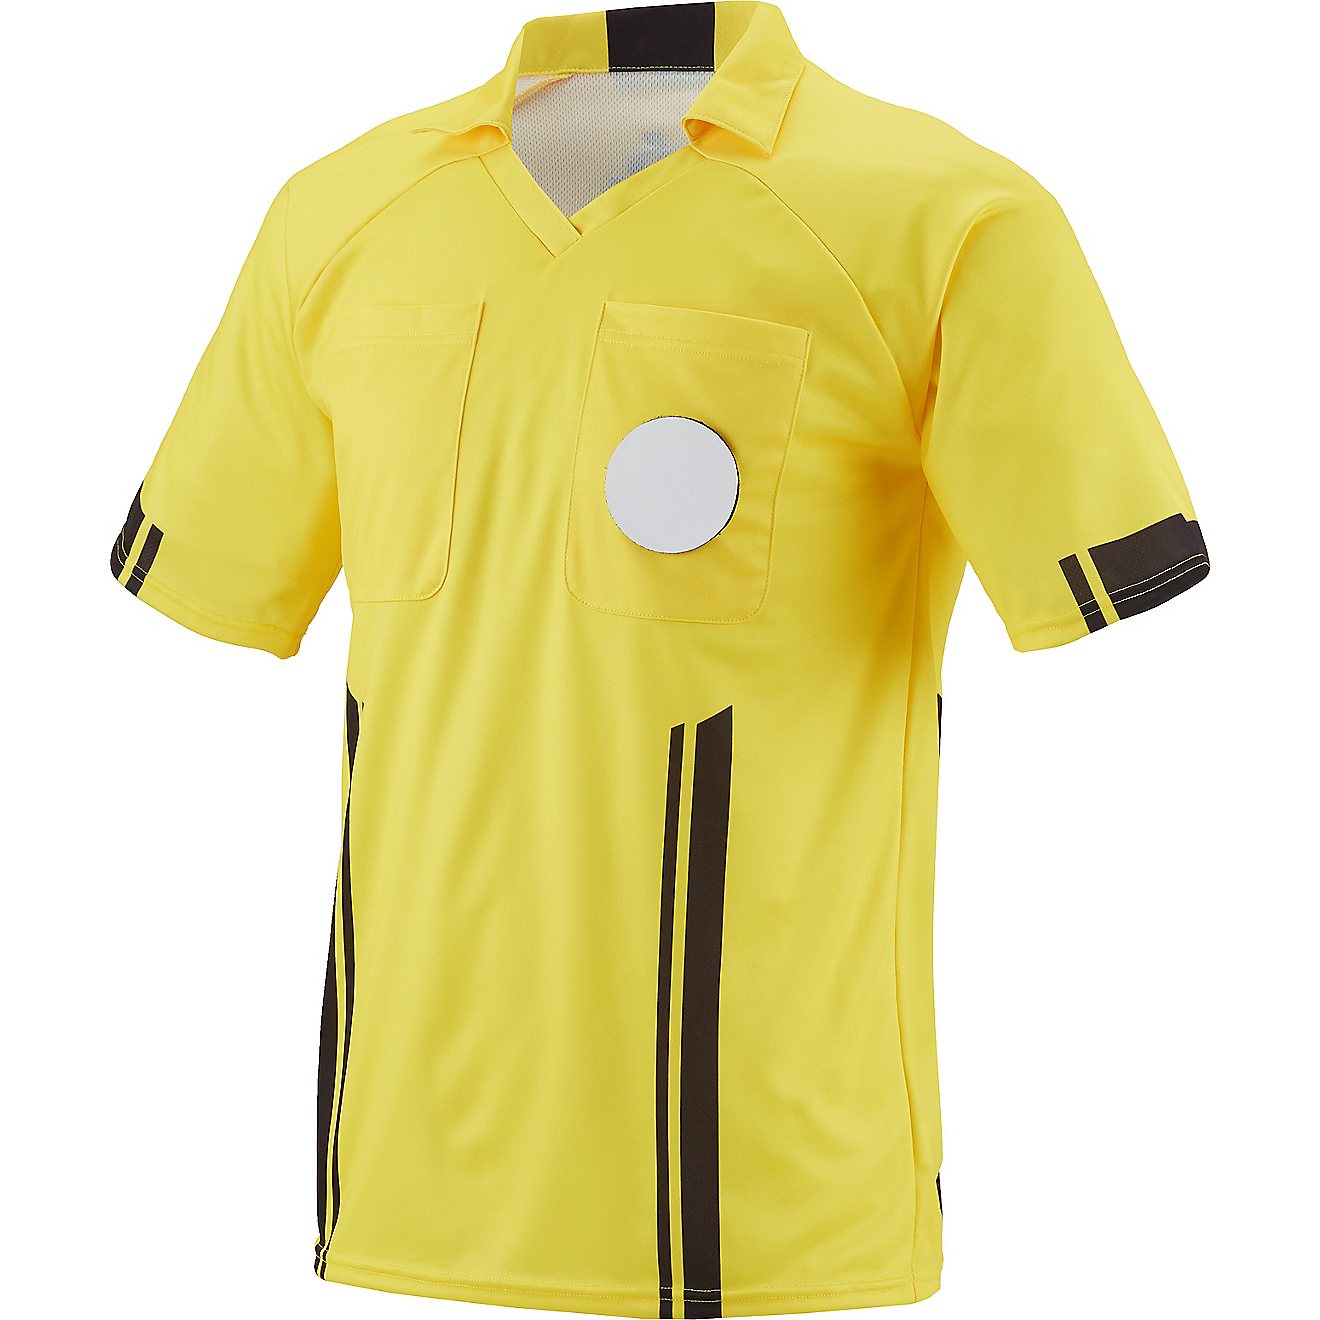 Brava Soccer Adults' Referee Jersey                                                                                              - view number 3